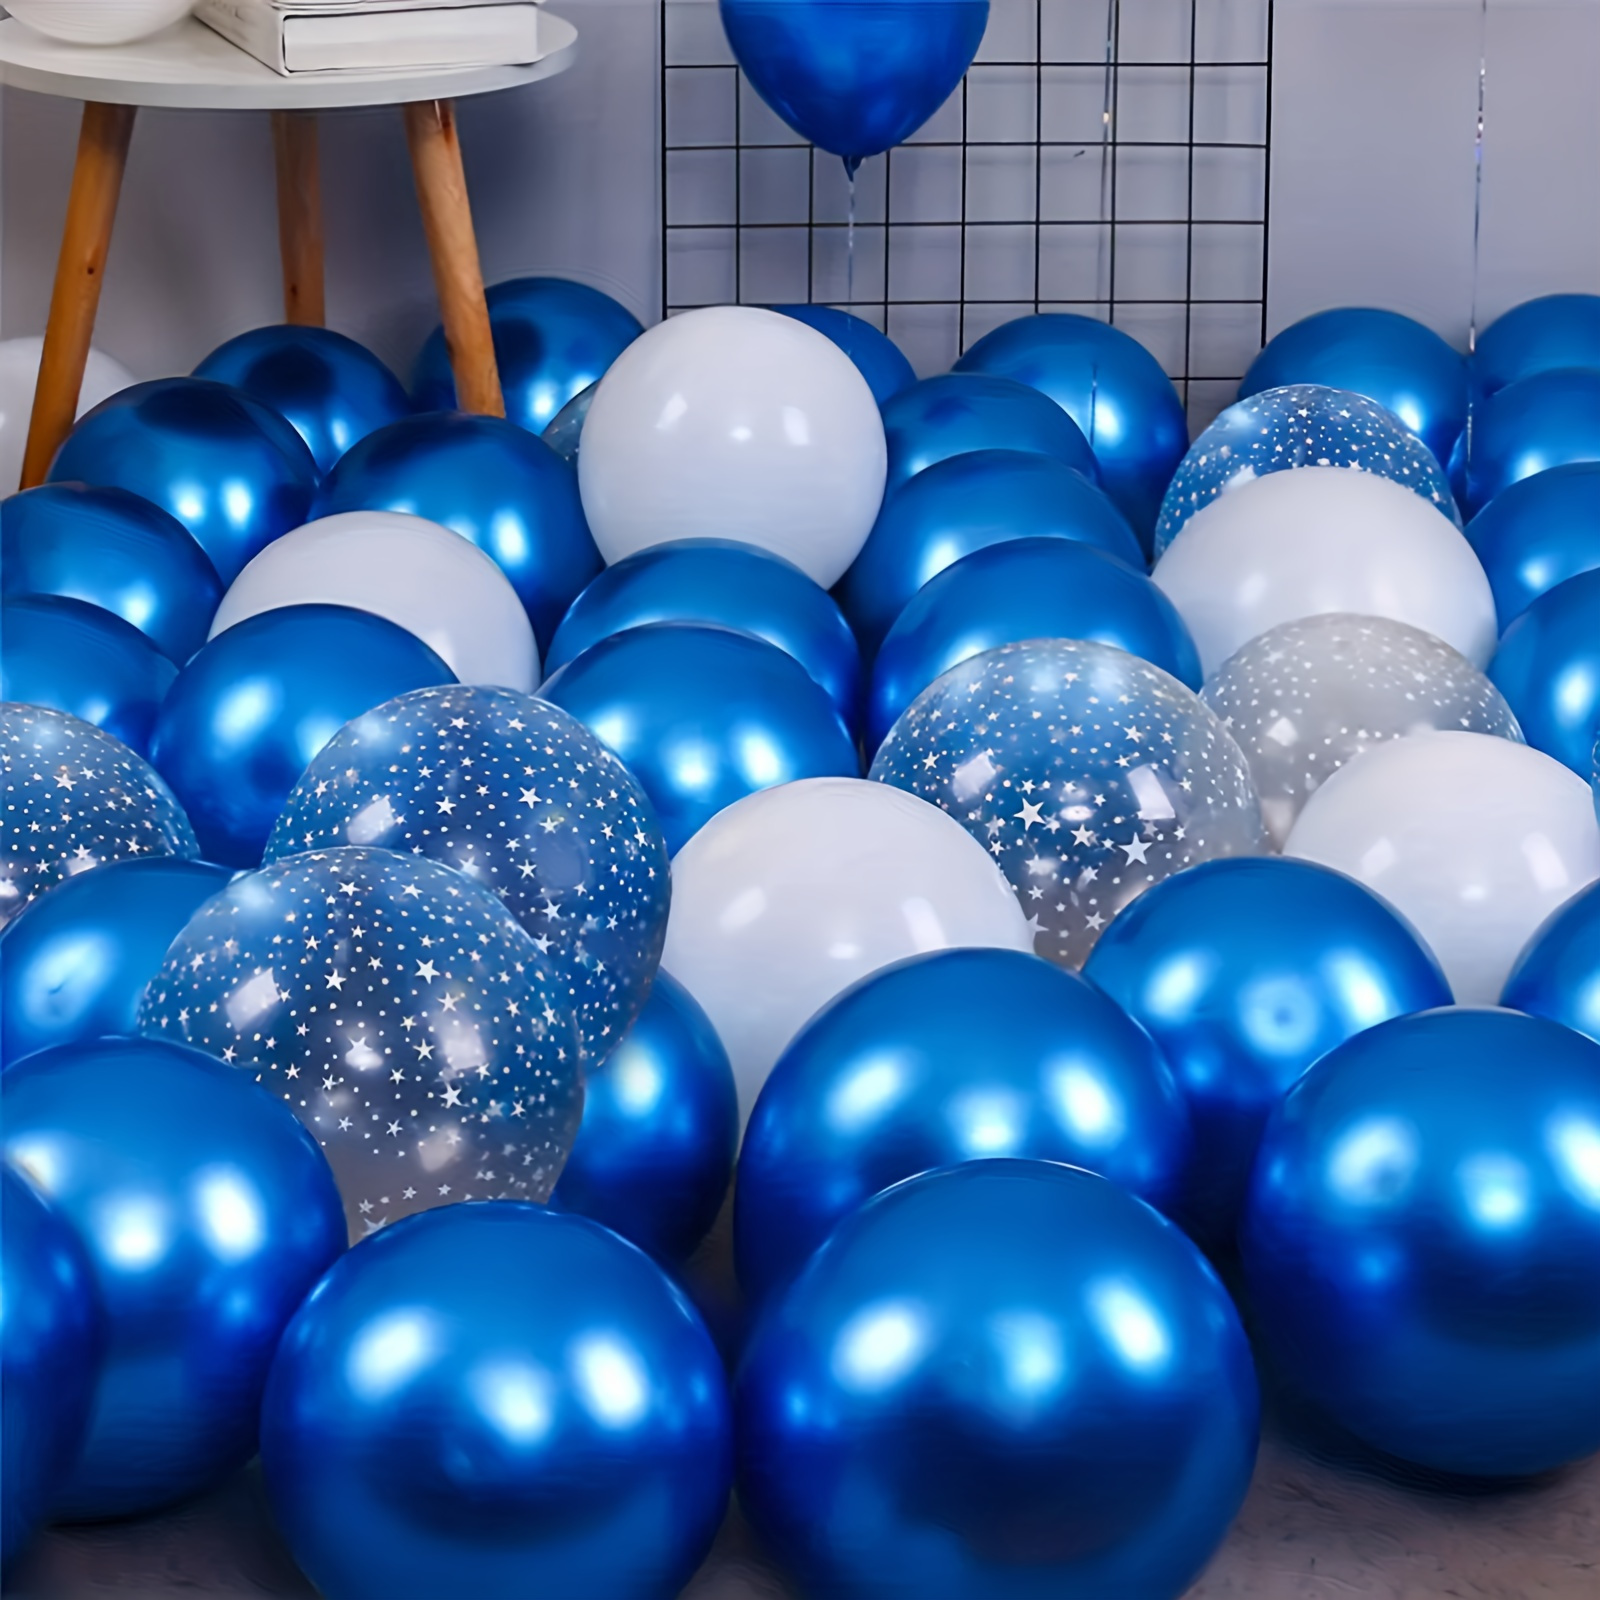 

50-piece Metallic Blue & White Star Balloon Set - Perfect For Birthdays, Weddings, Baby Showers & More - Durable Latex, No Power Needed, Ages 14+ Bring Your Festive Vision To Life With Ease